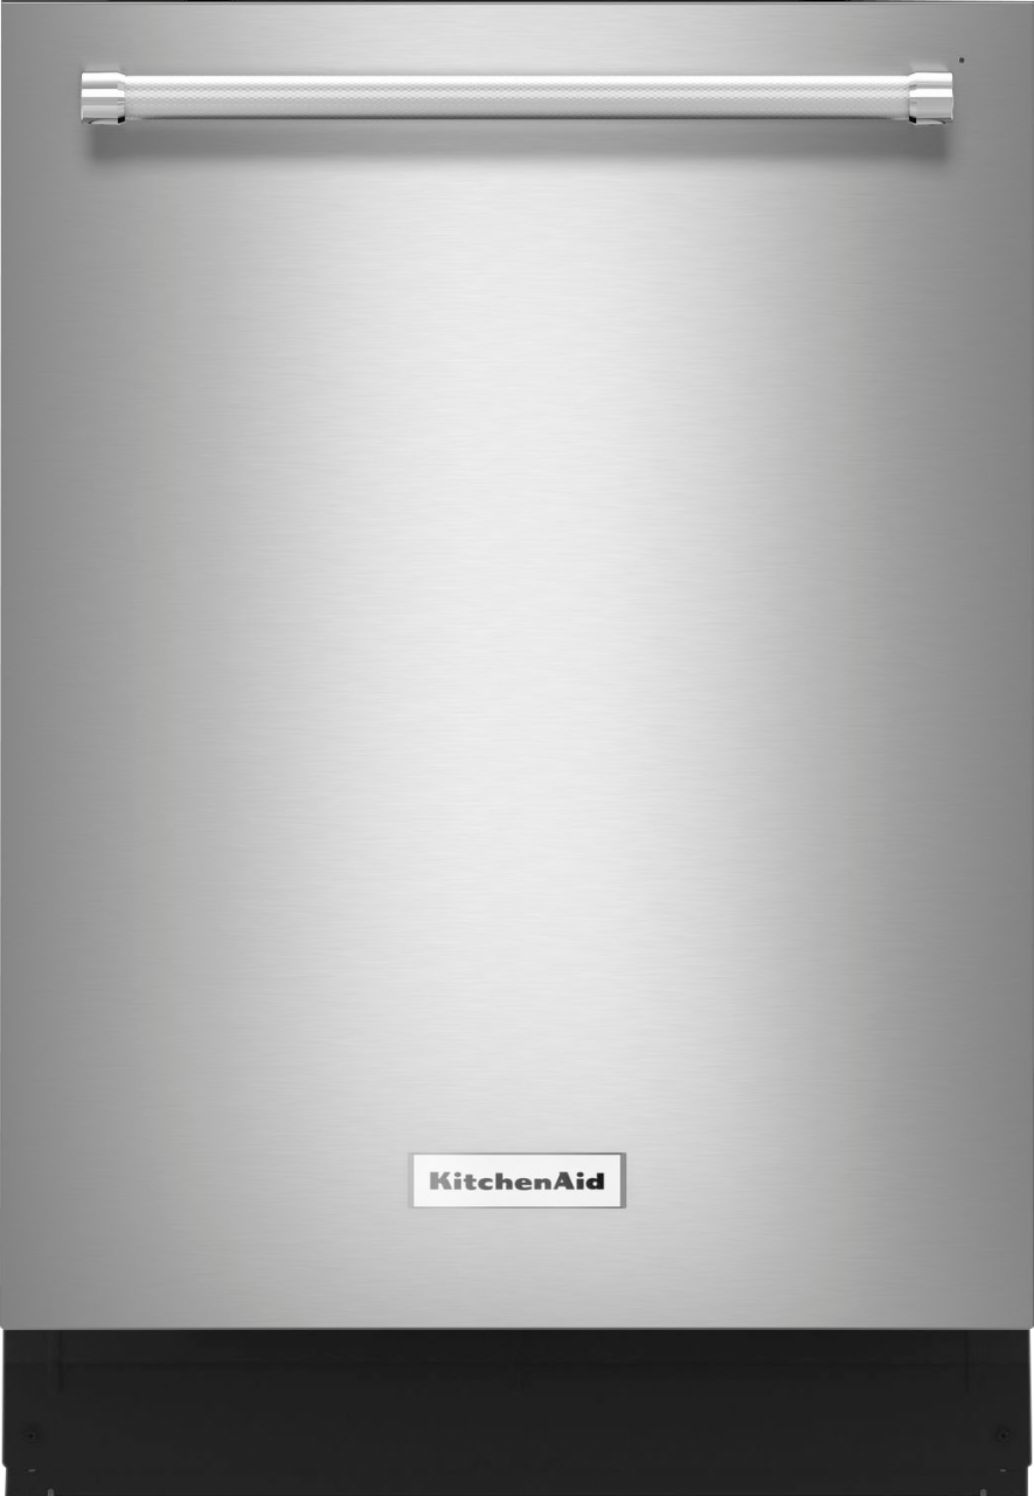 Kitchenaid 24 Top Control Built In Dishwasher With Stainless Steel Tub Stainless Steel Kdte204gps Best Buy